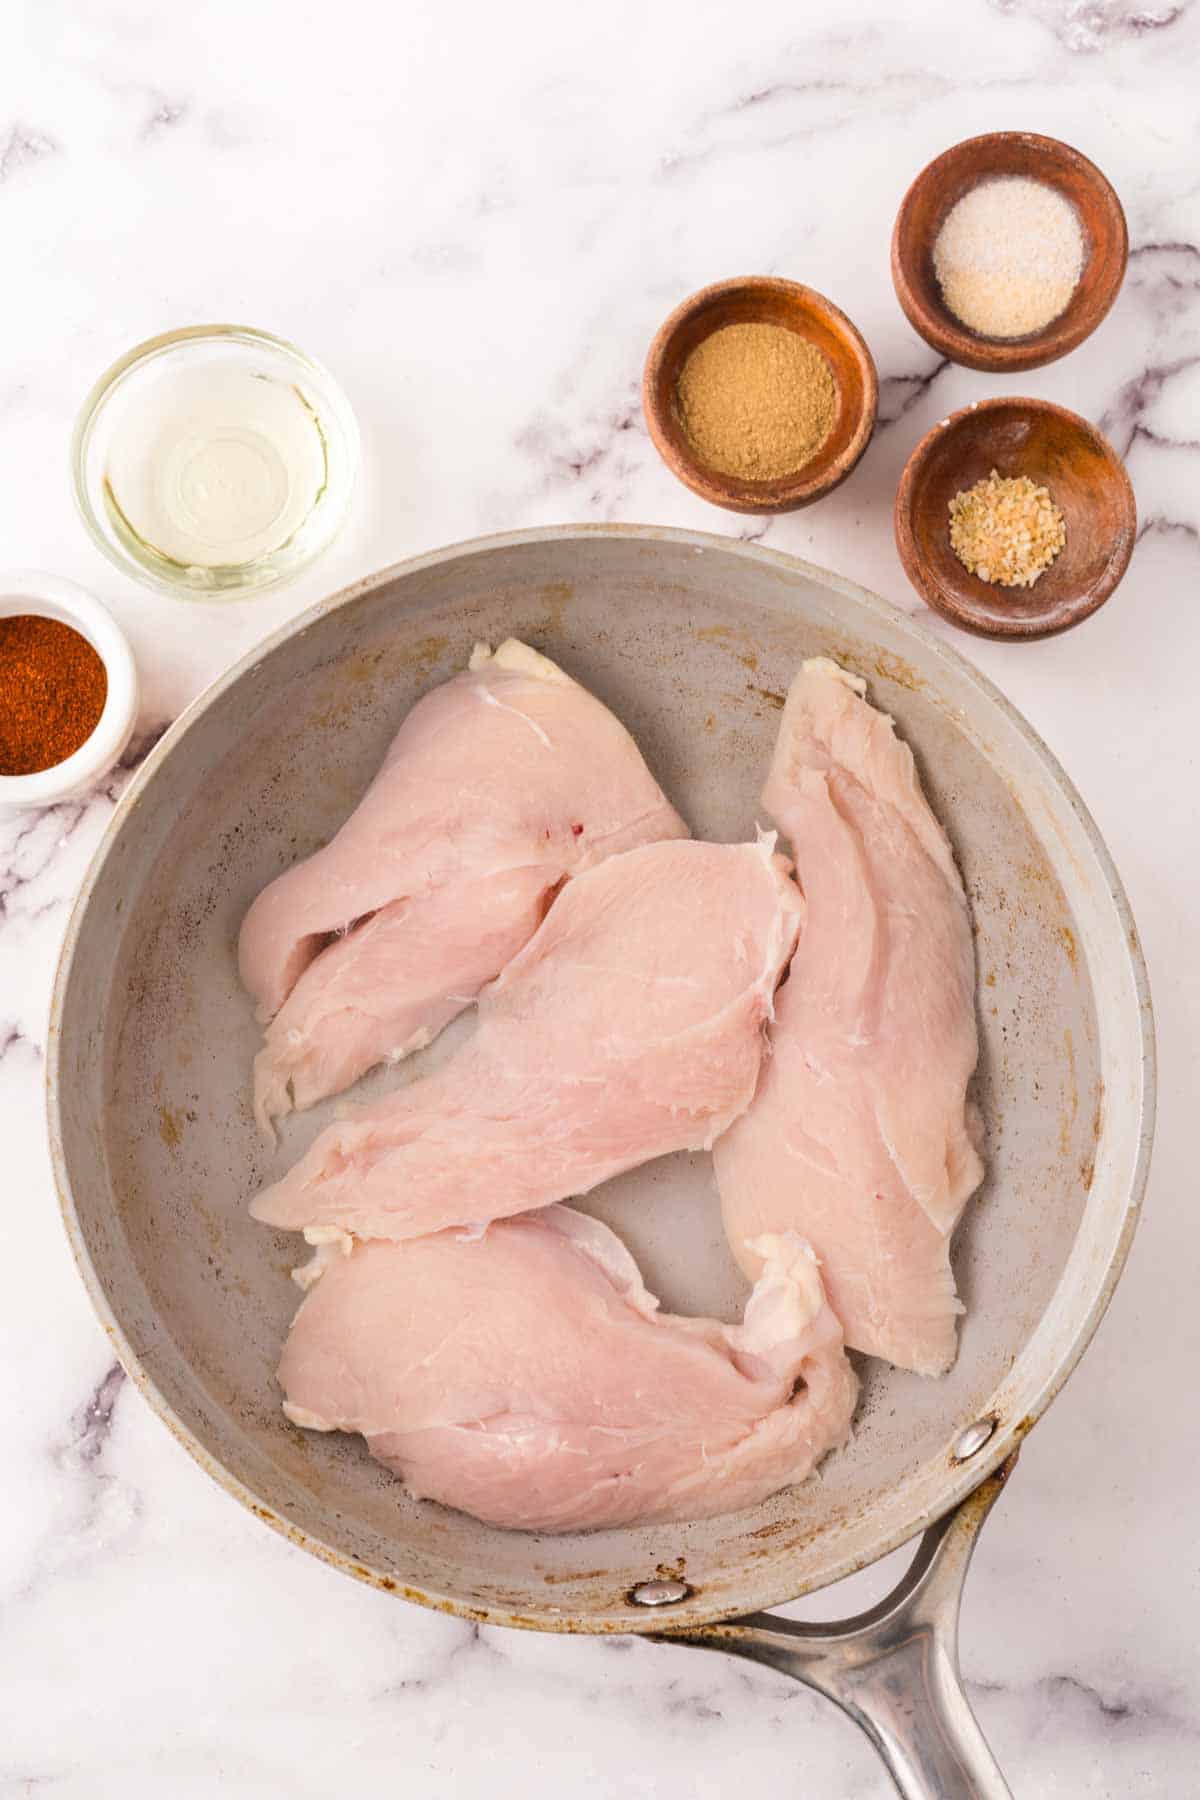 a pan of four raw chicken breasts ready to cook.